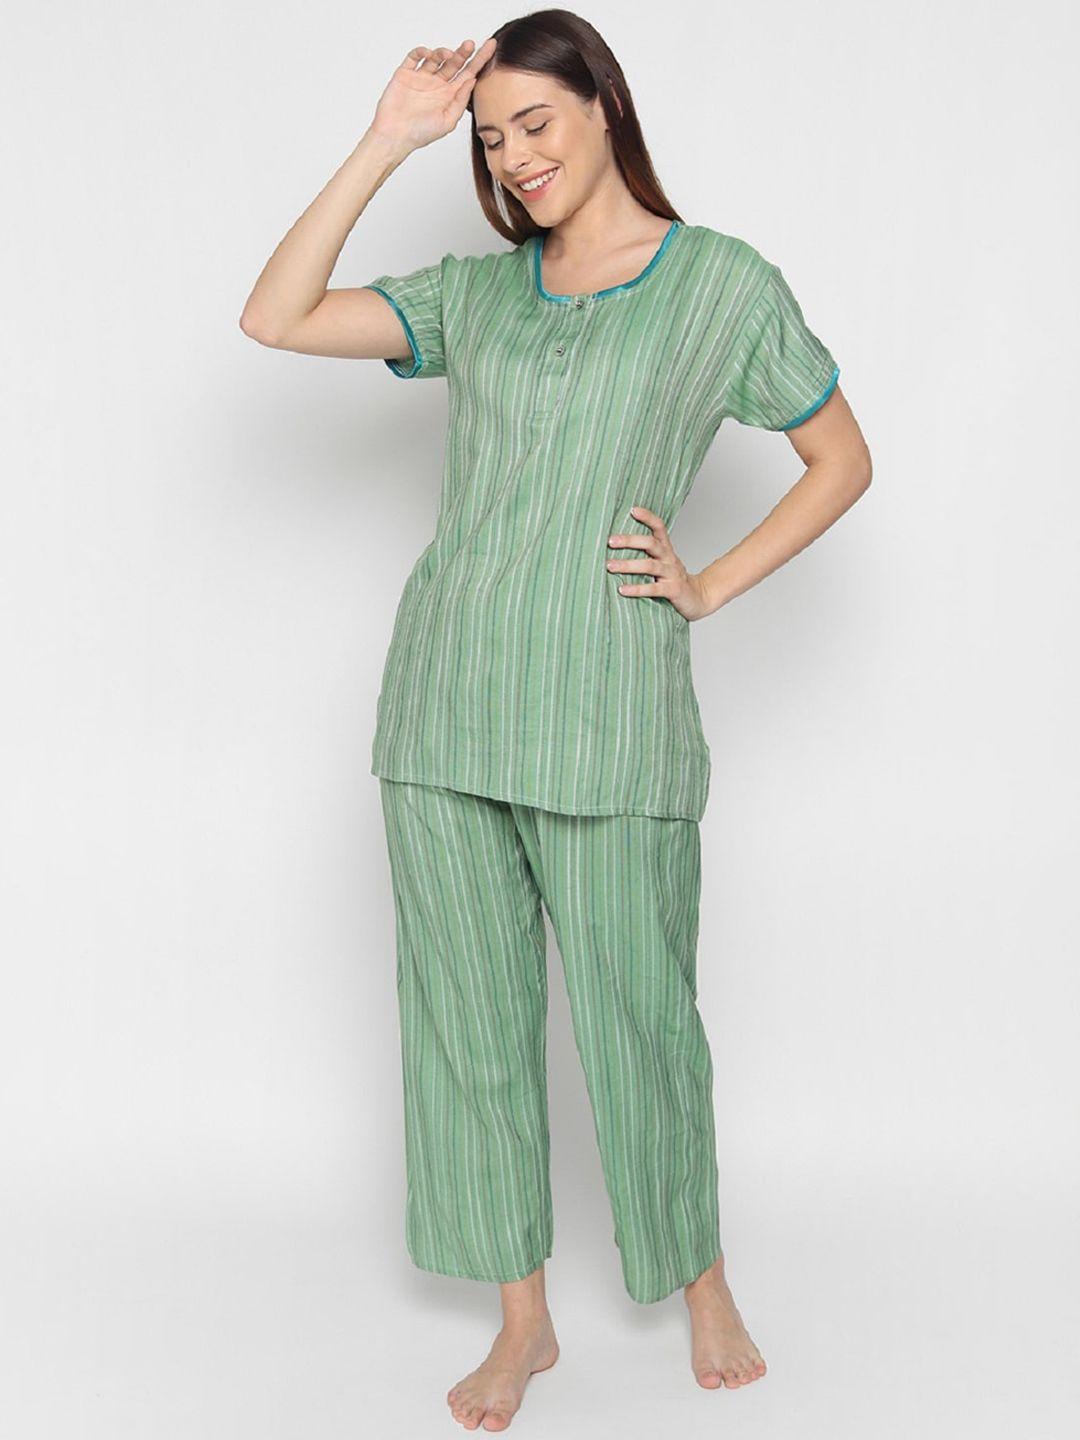 noty striped night suit